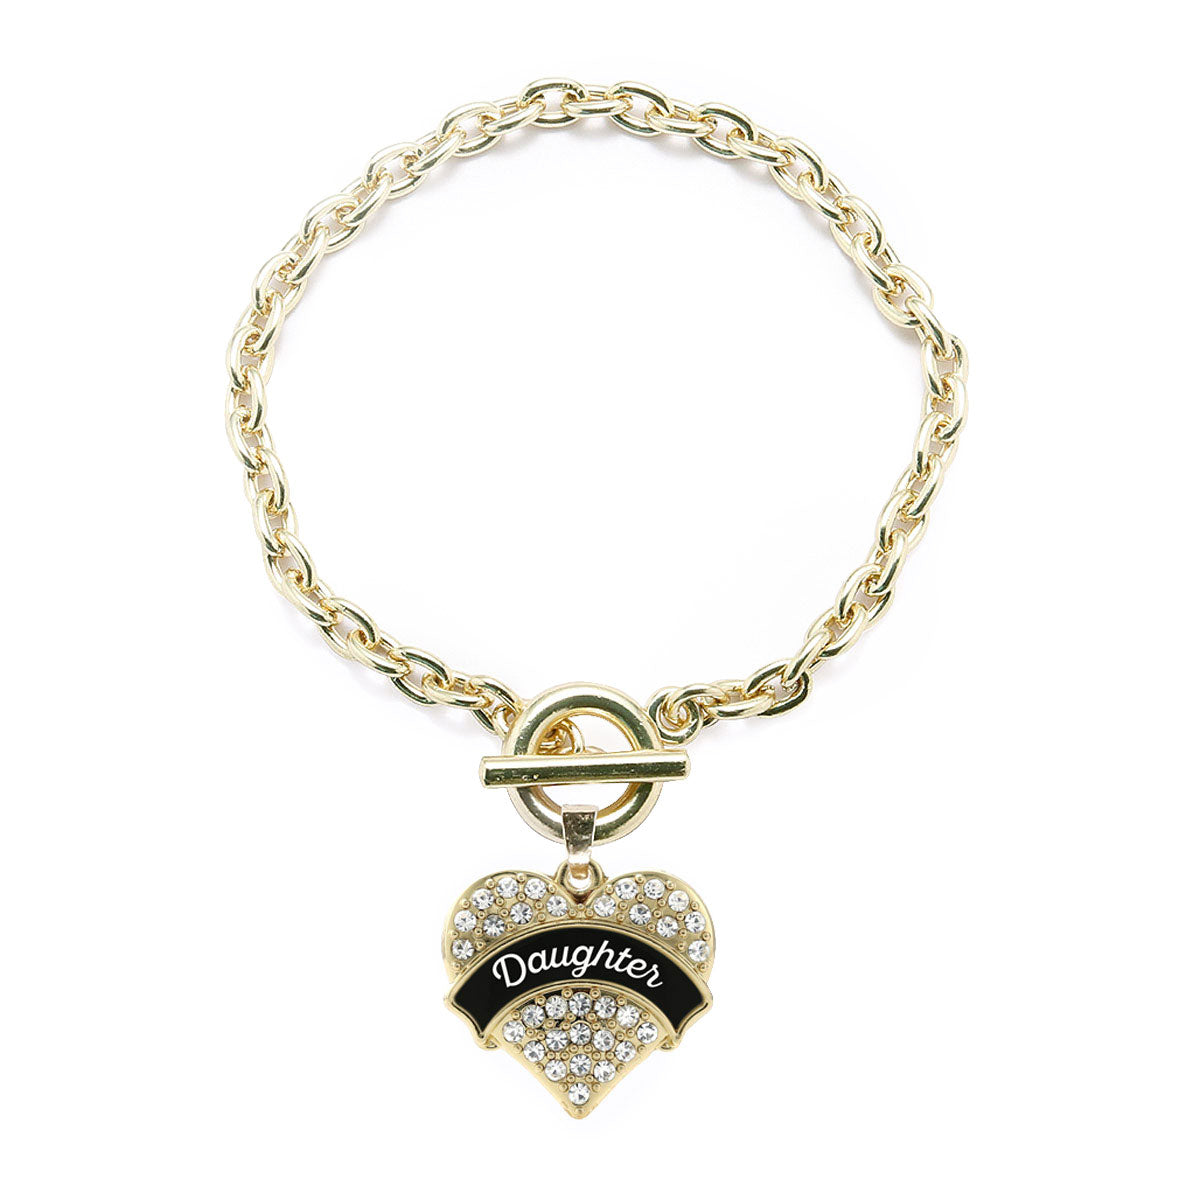 Gold Black and White Daughter Pave Heart Charm Toggle Bracelet